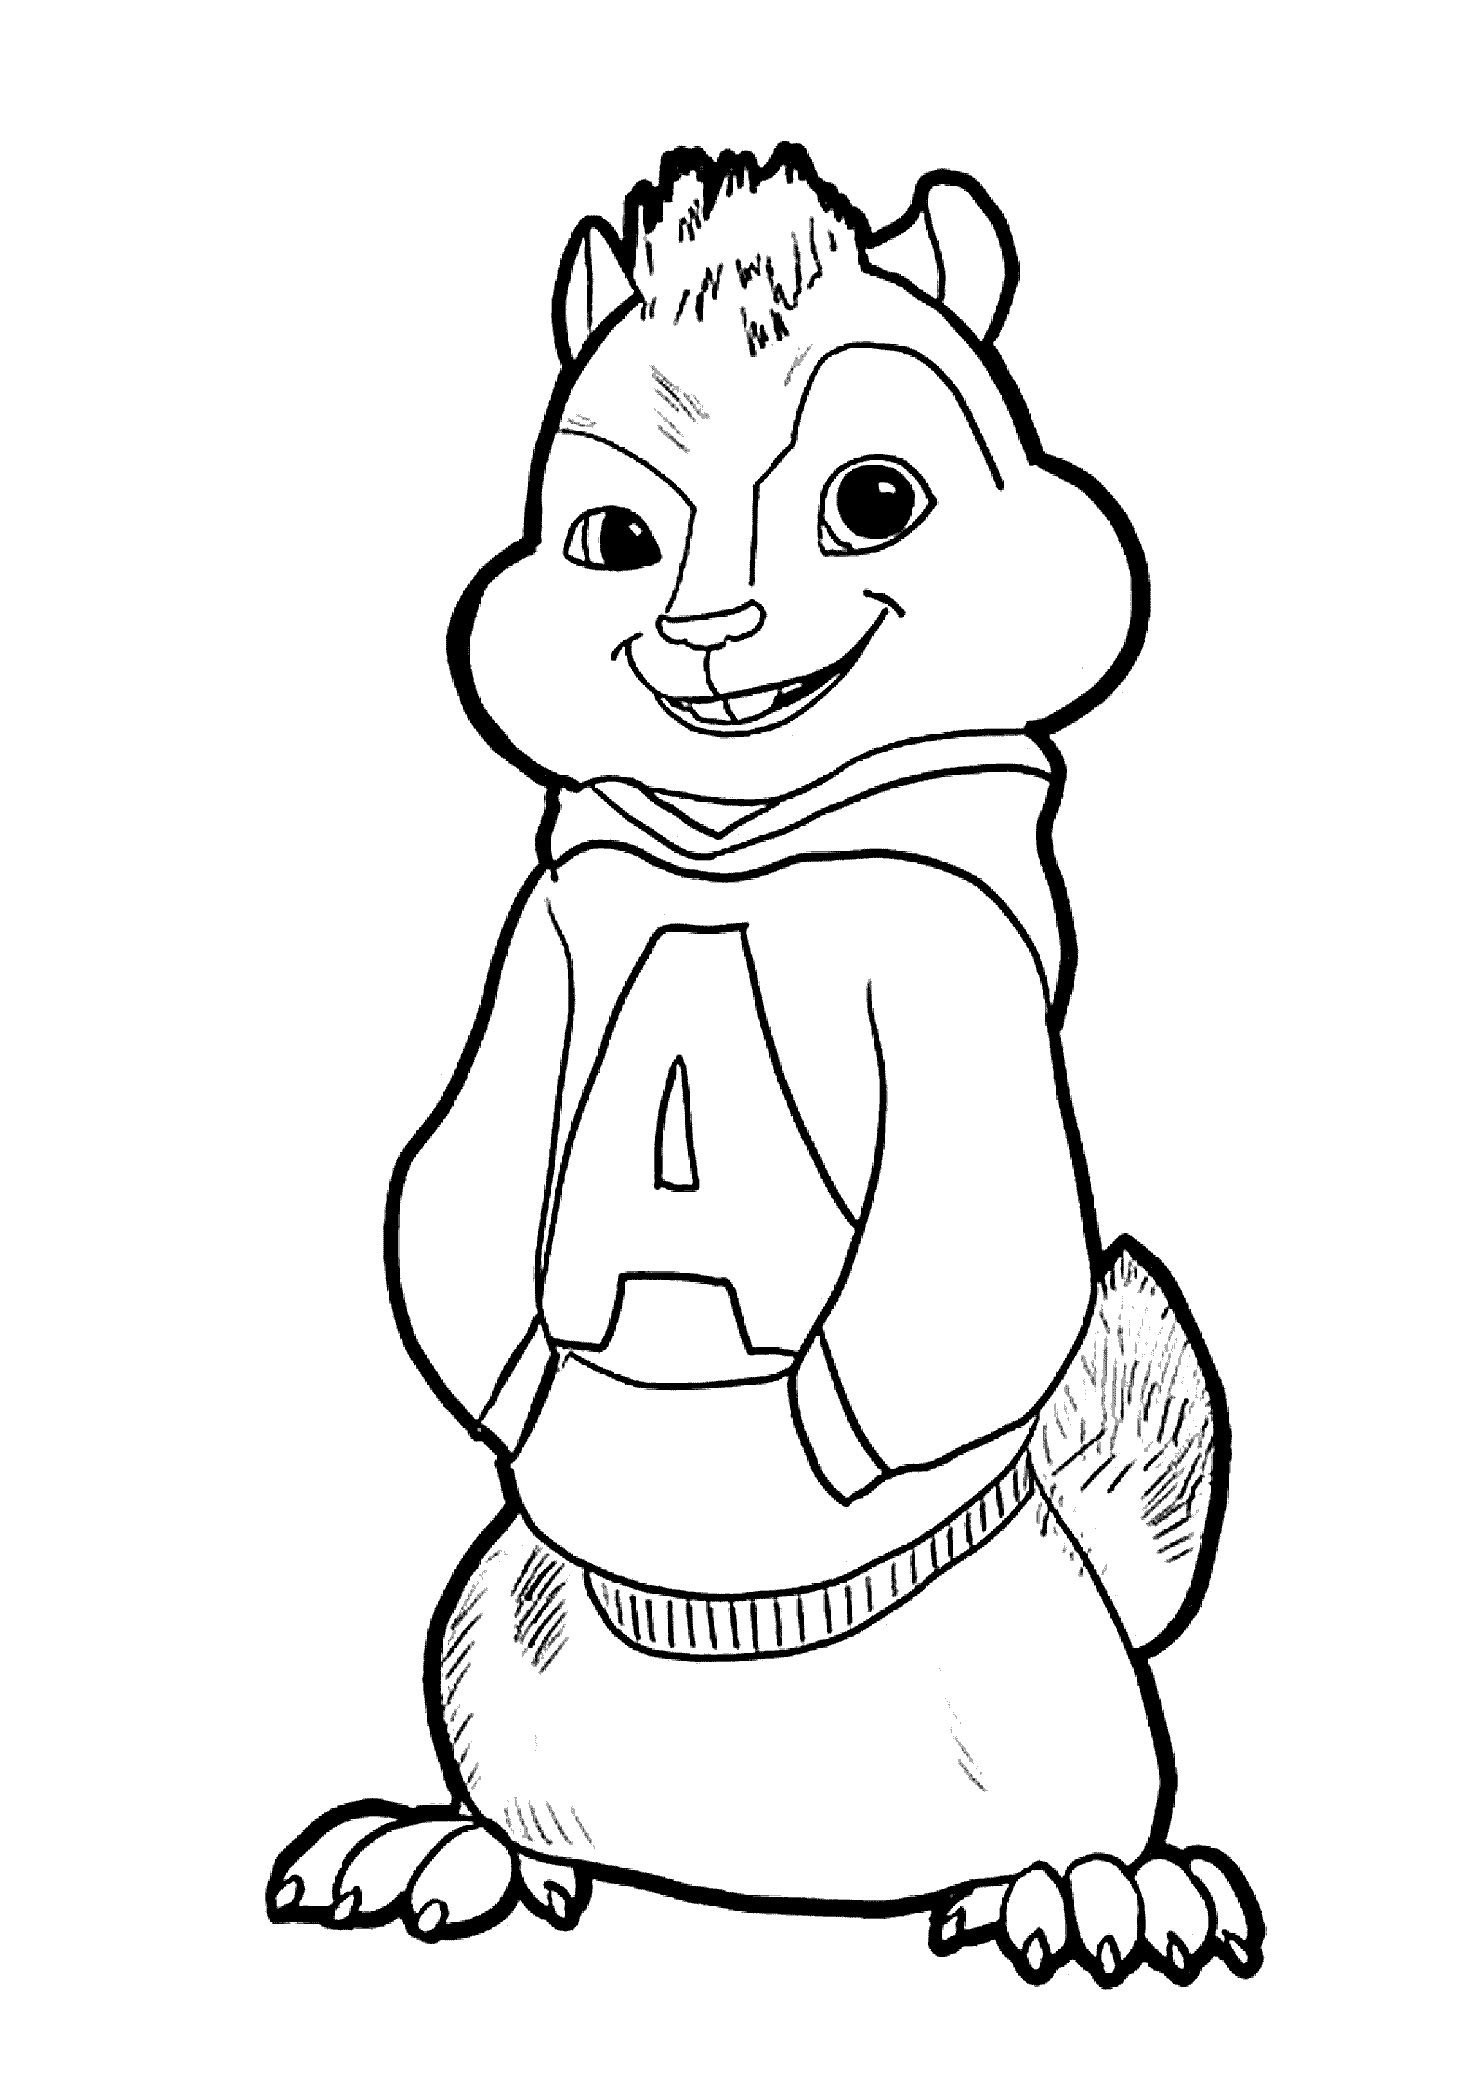 chipmunk coloring pages - High Quality Coloring Pages